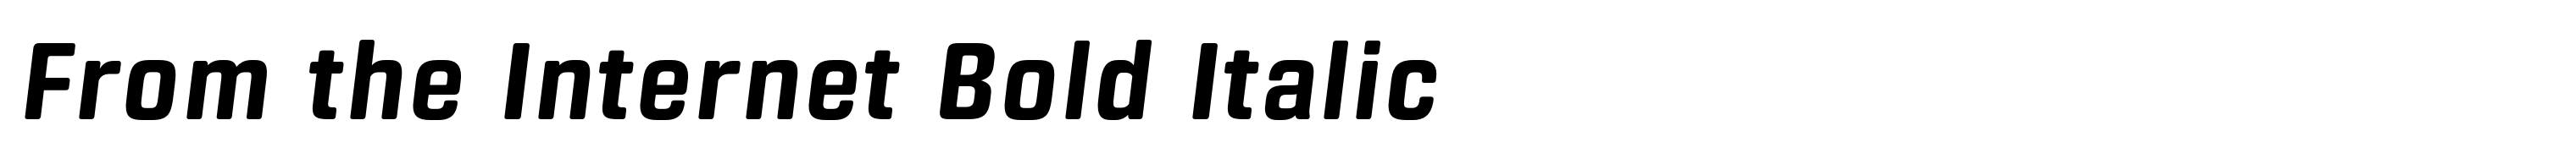 From the Internet Bold Italic